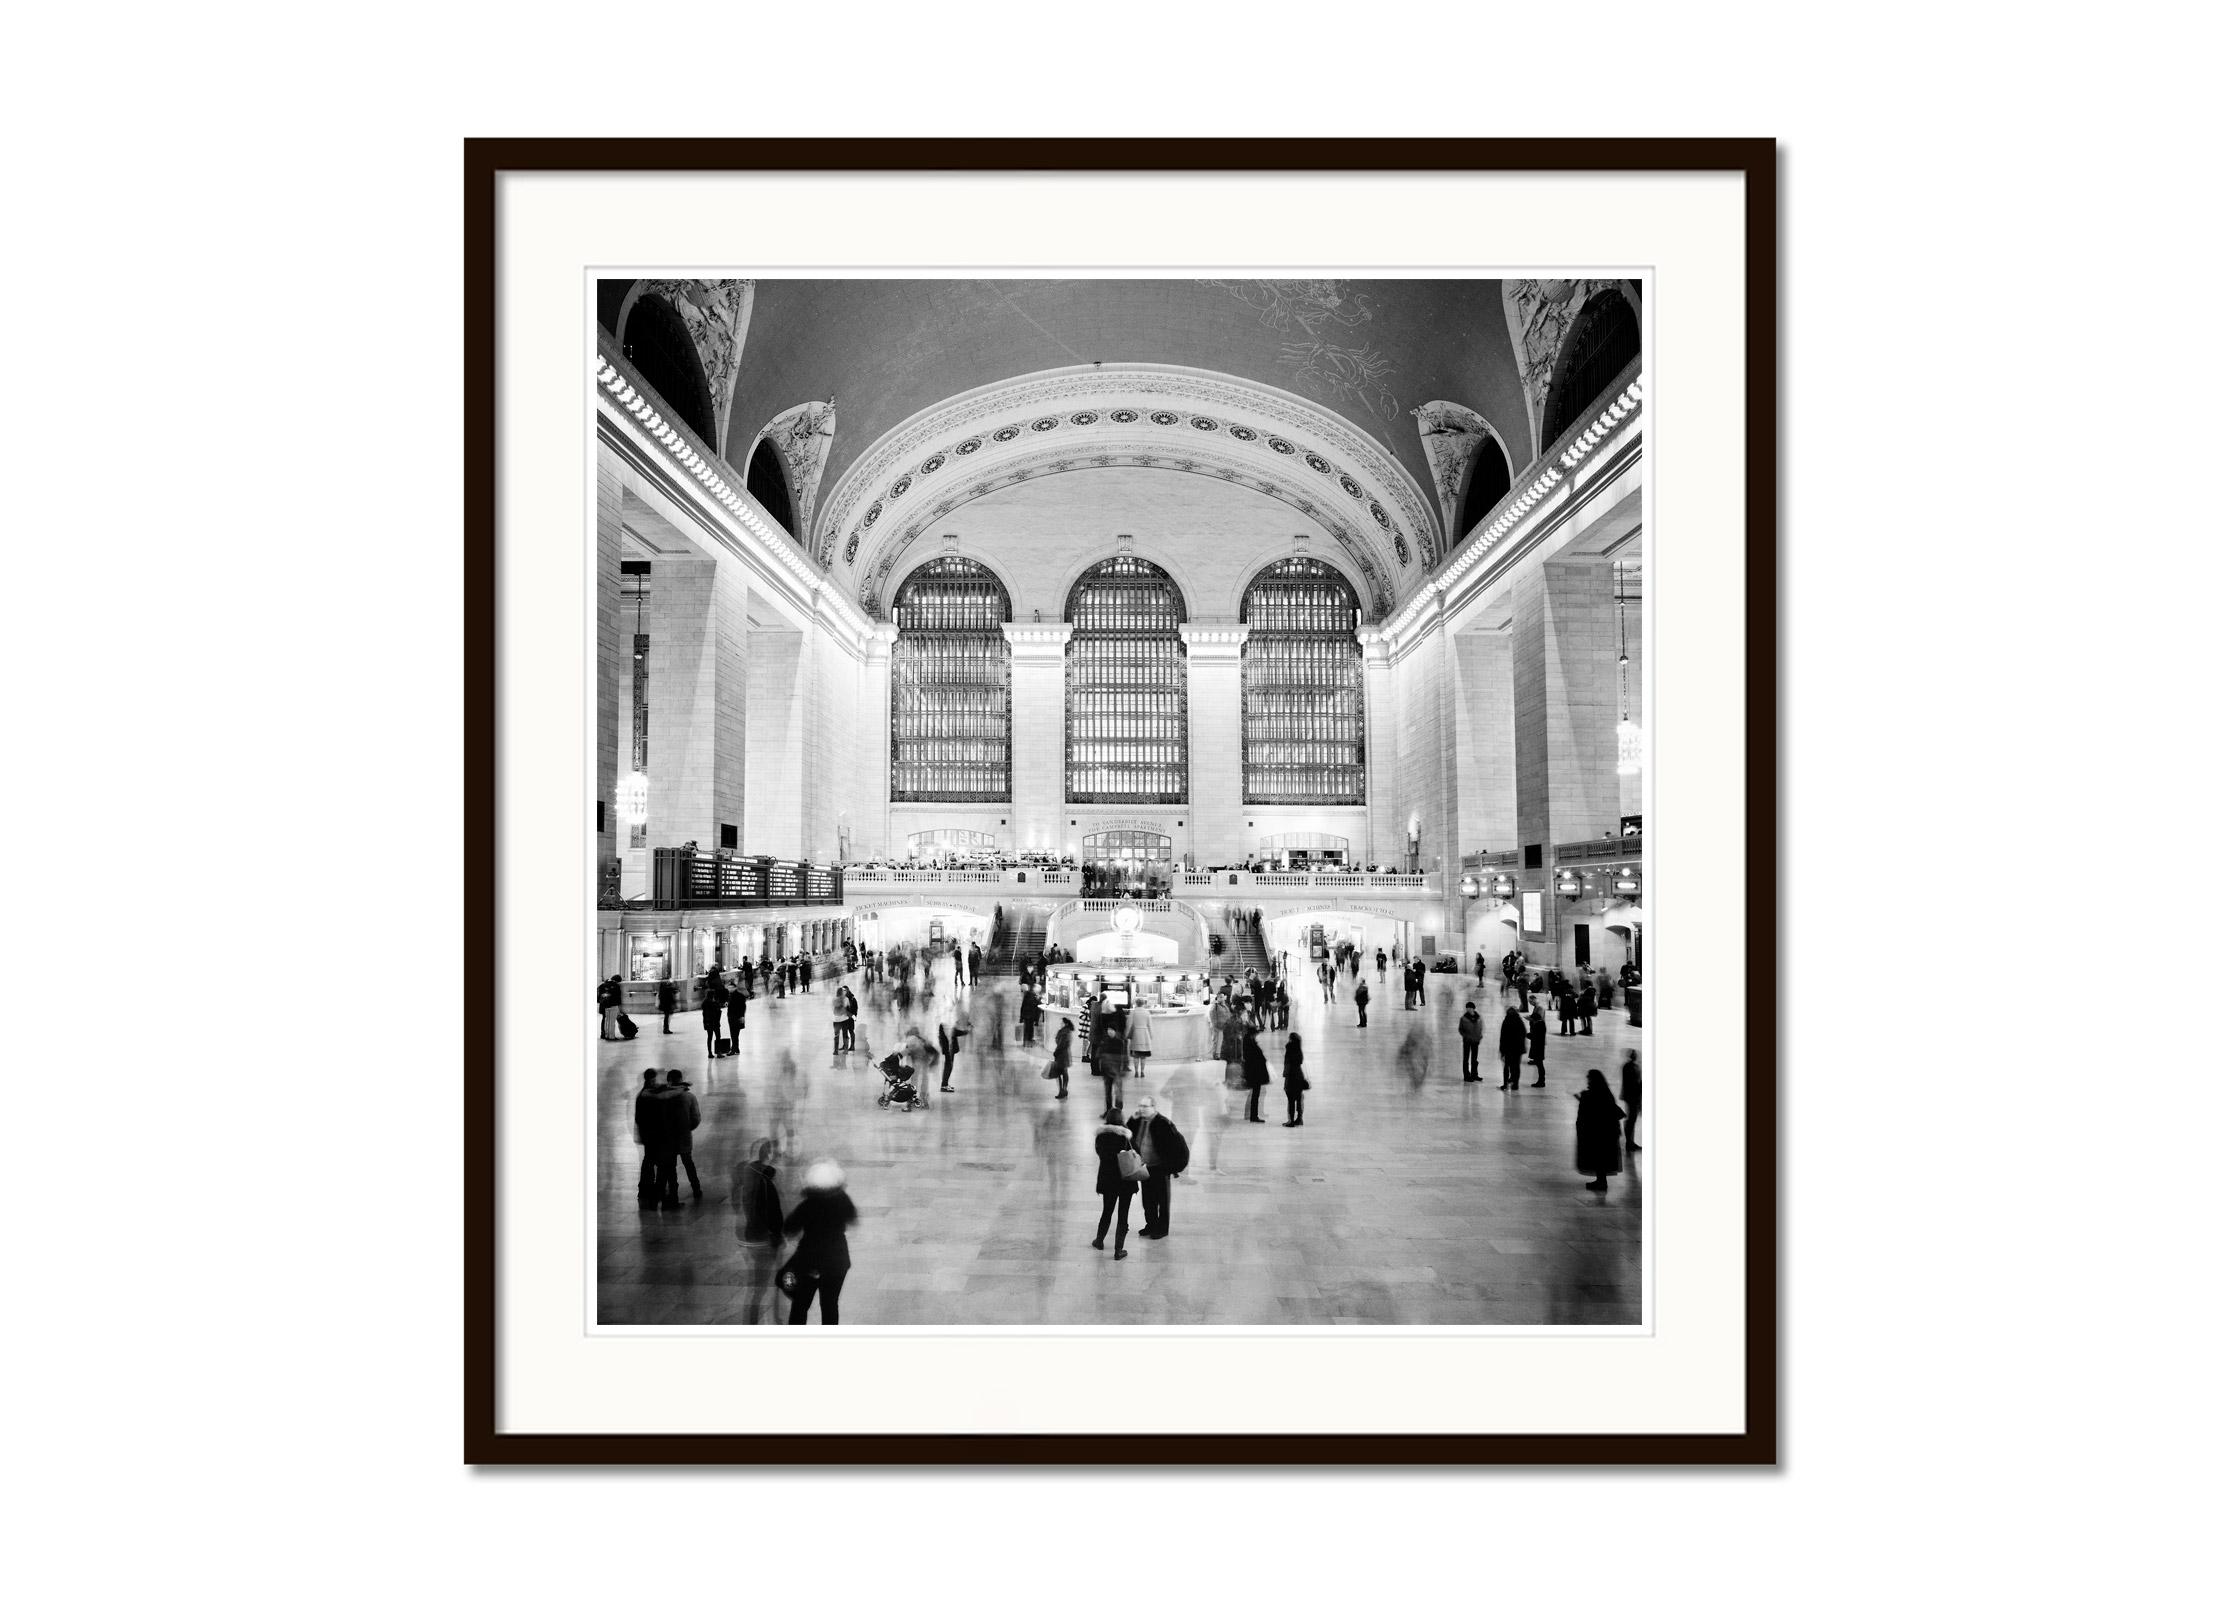 Black and white fine art cityscape photography. Archival pigment ink print, edition of 9. Signed, titled, dated and numbered by artist. Certificate of authenticity included. Printed with 4cm white border.
International award winner photographer